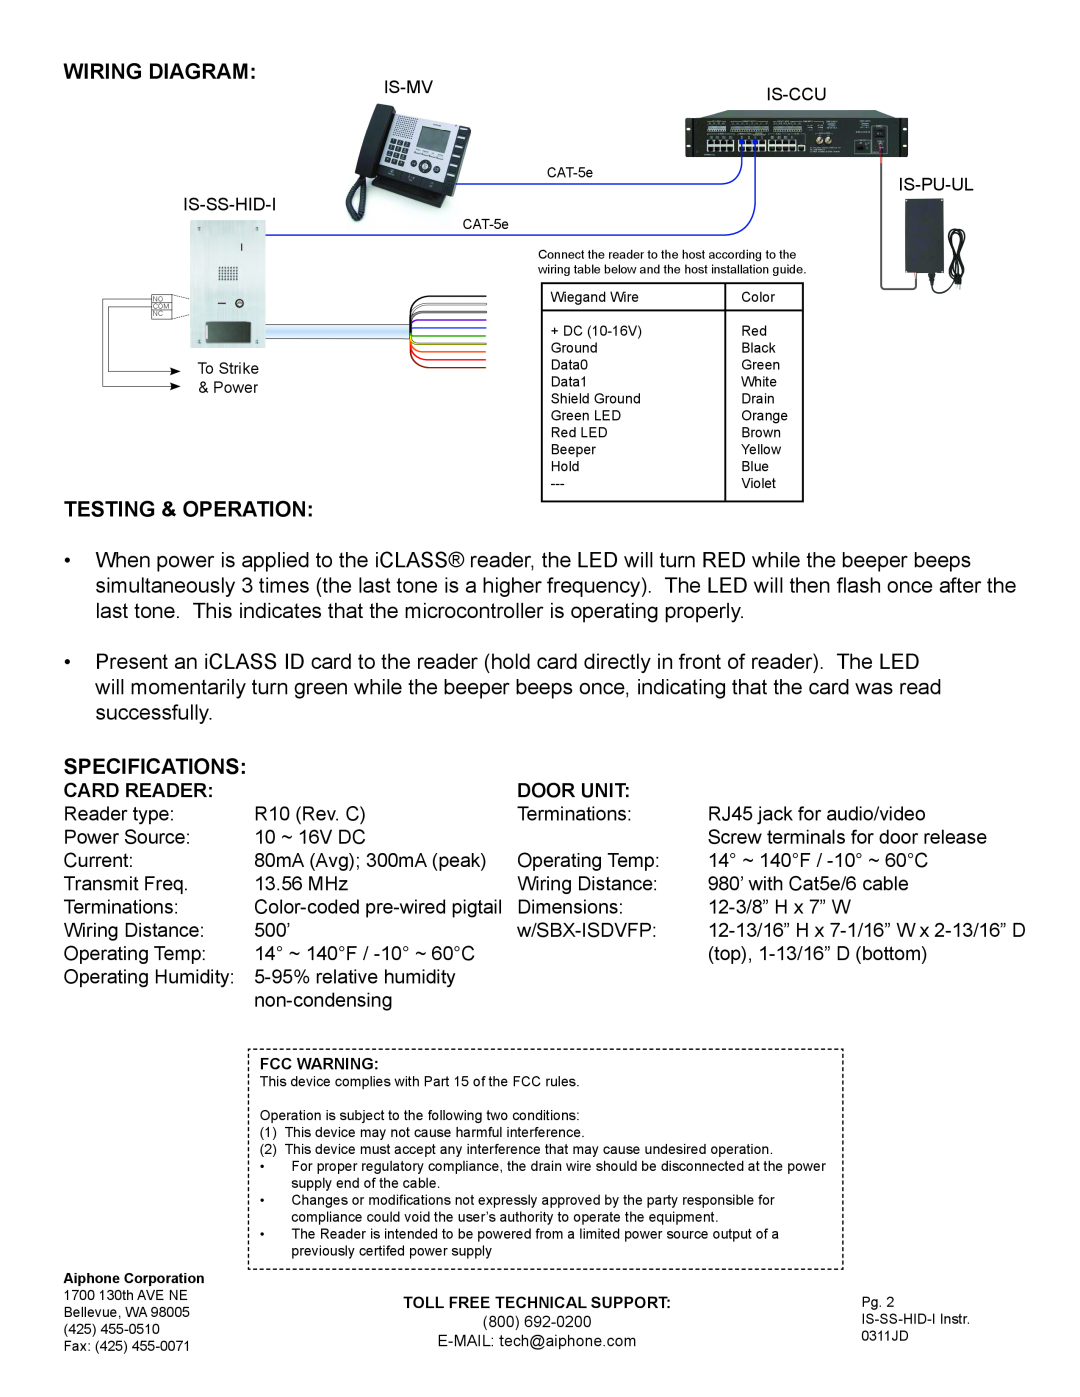 Aiphone IS-SS-HID-I dimensions Wiring Diagram, Testing & Operation, Specifications, Card Reader, Door Unit 